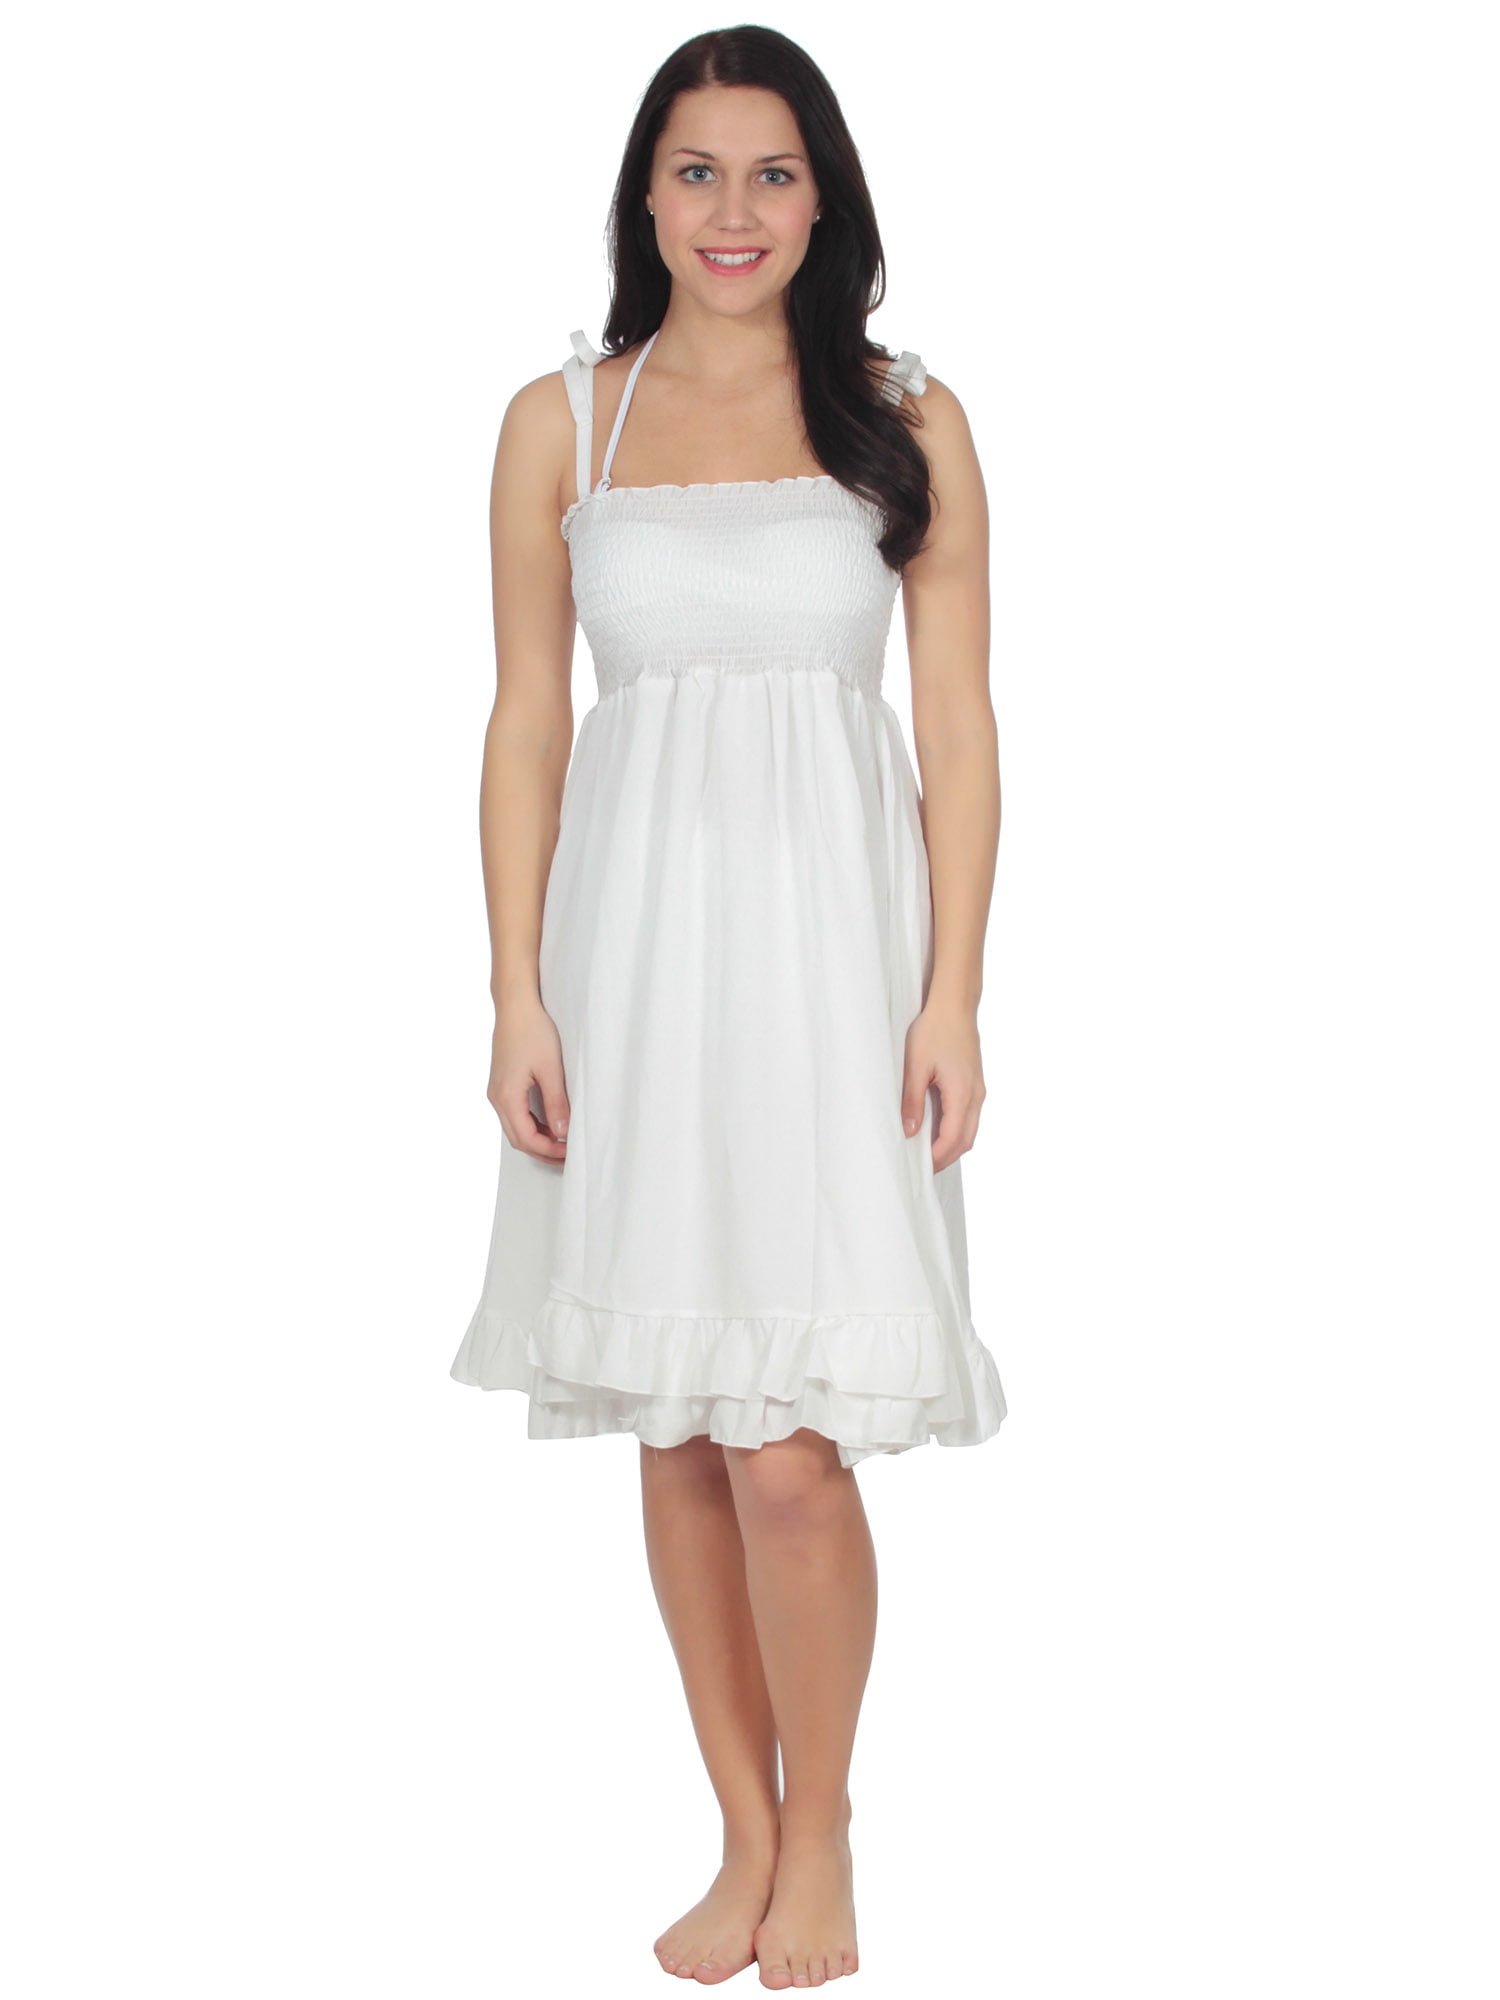 Women's White Smocked Dress with ...